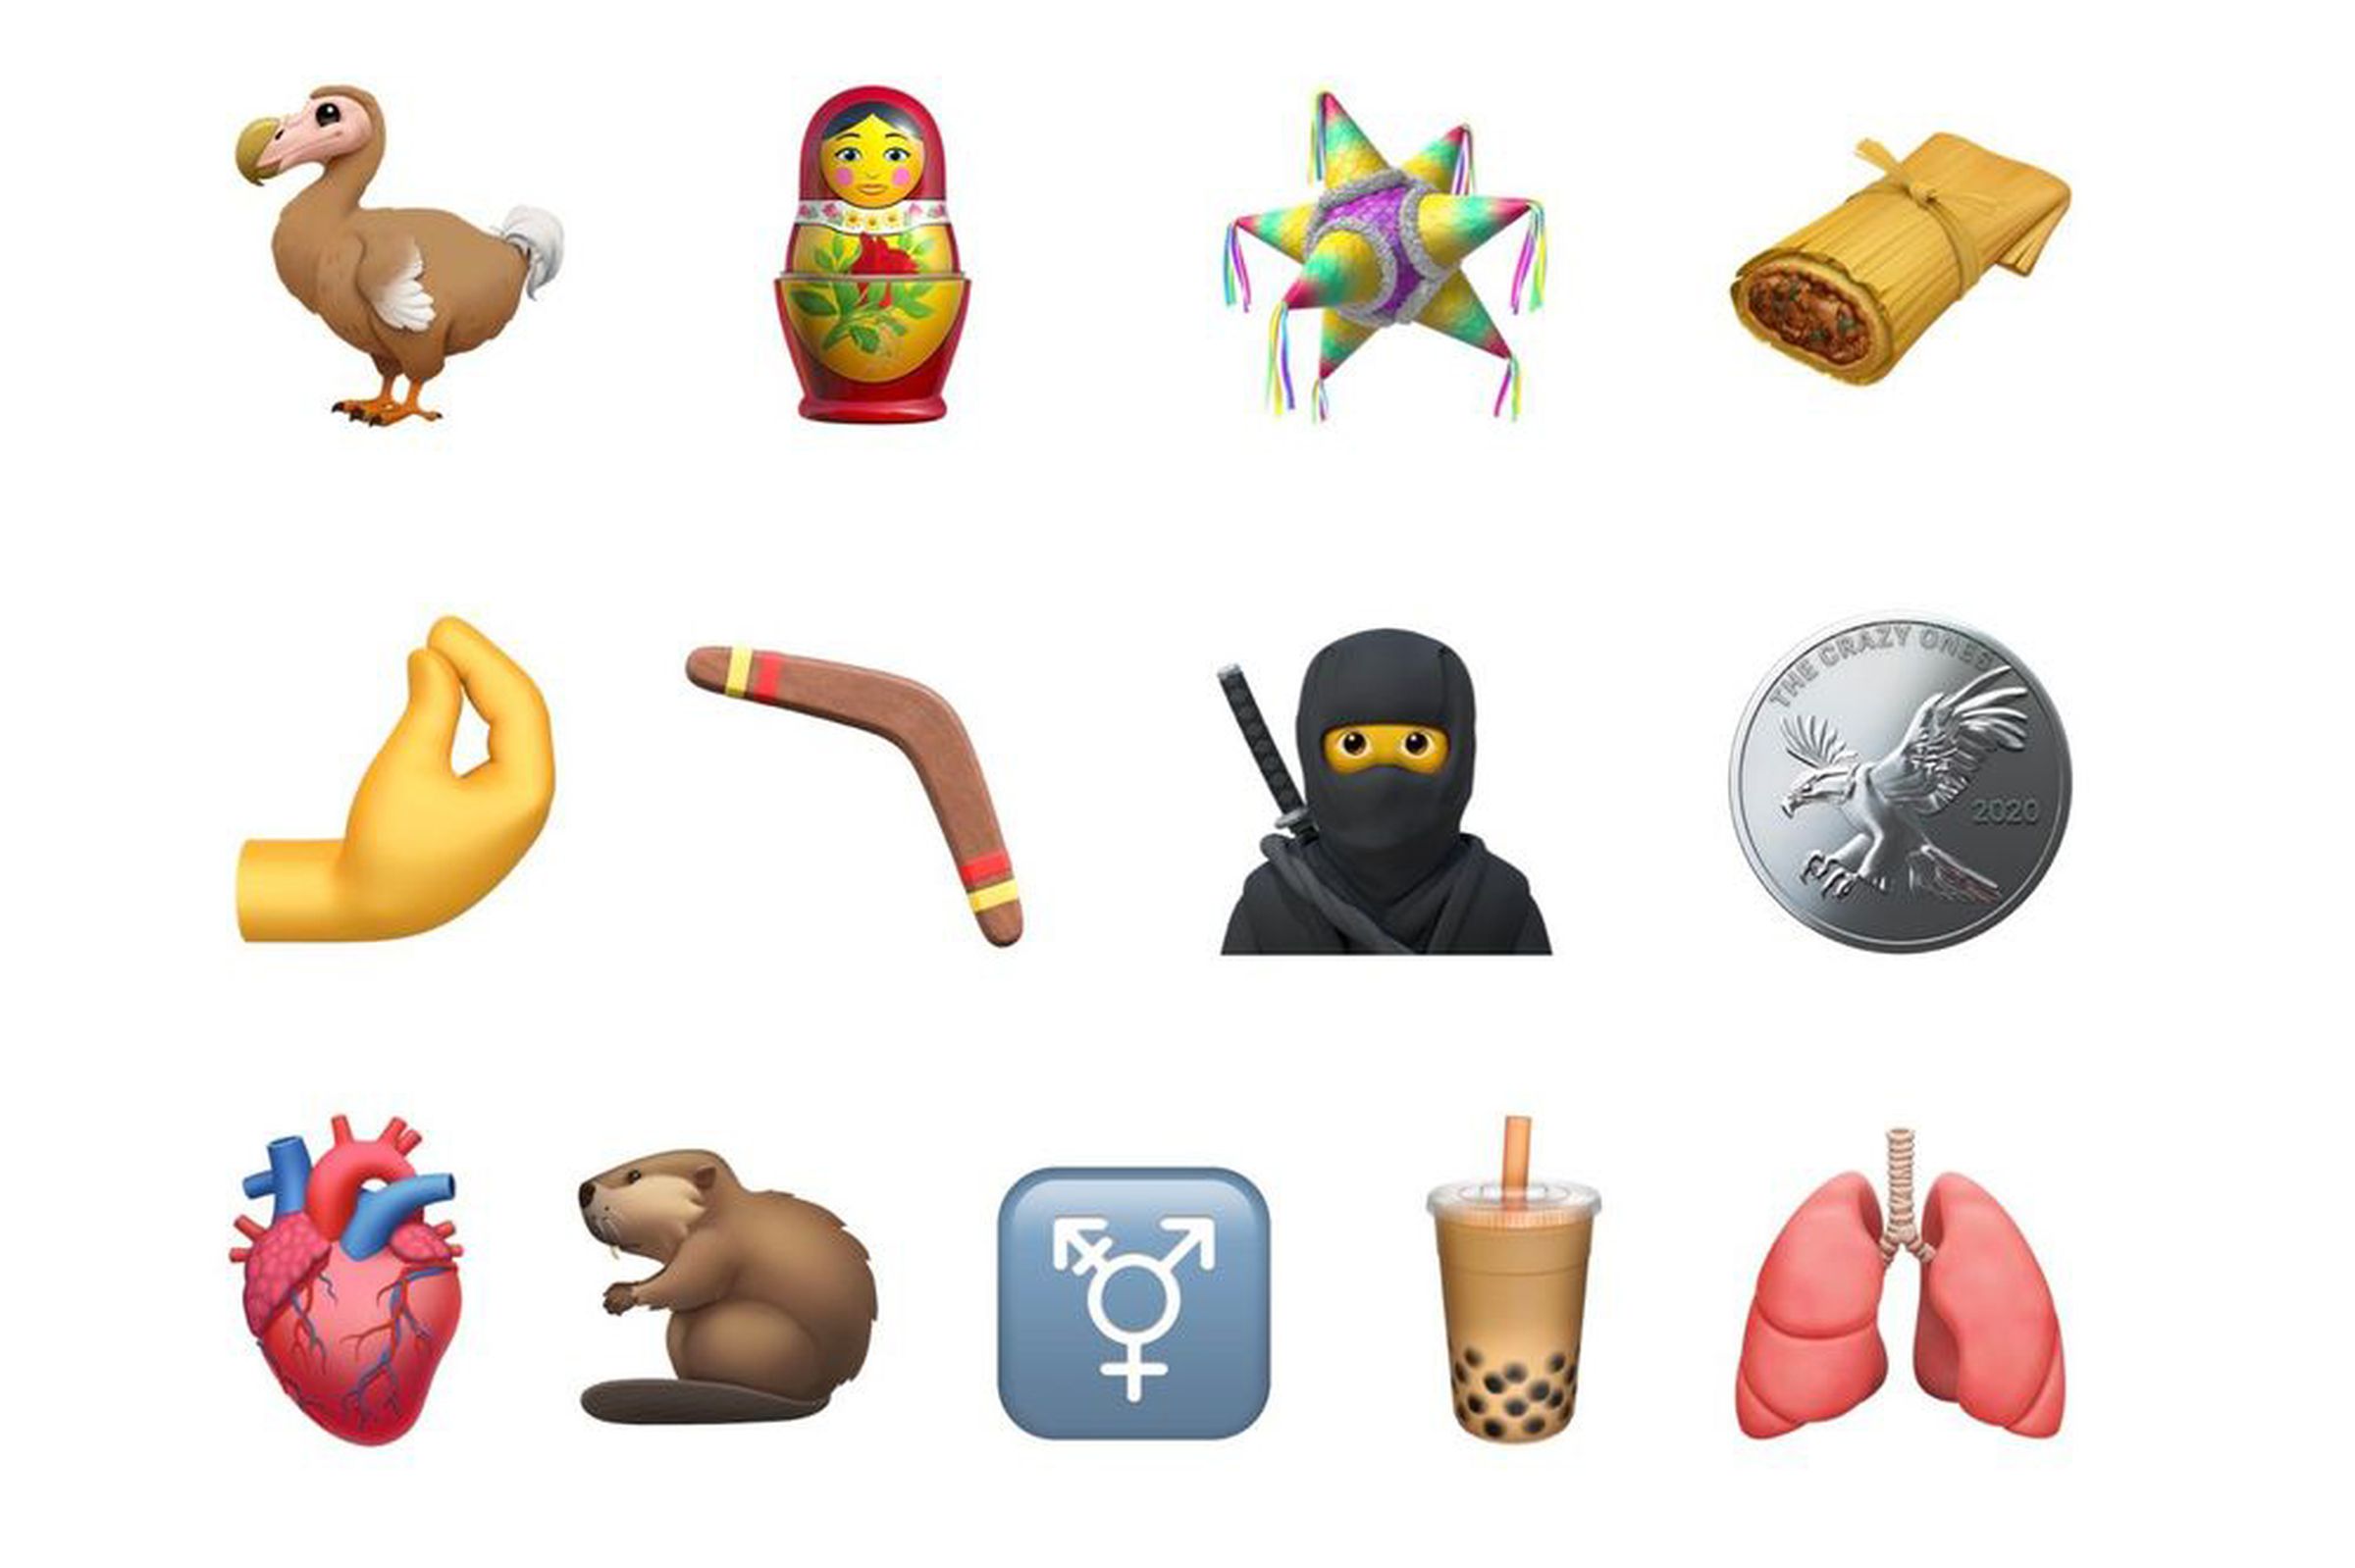 Apple’s new emoji include bubble tea, a dodo, and pinched fingers.